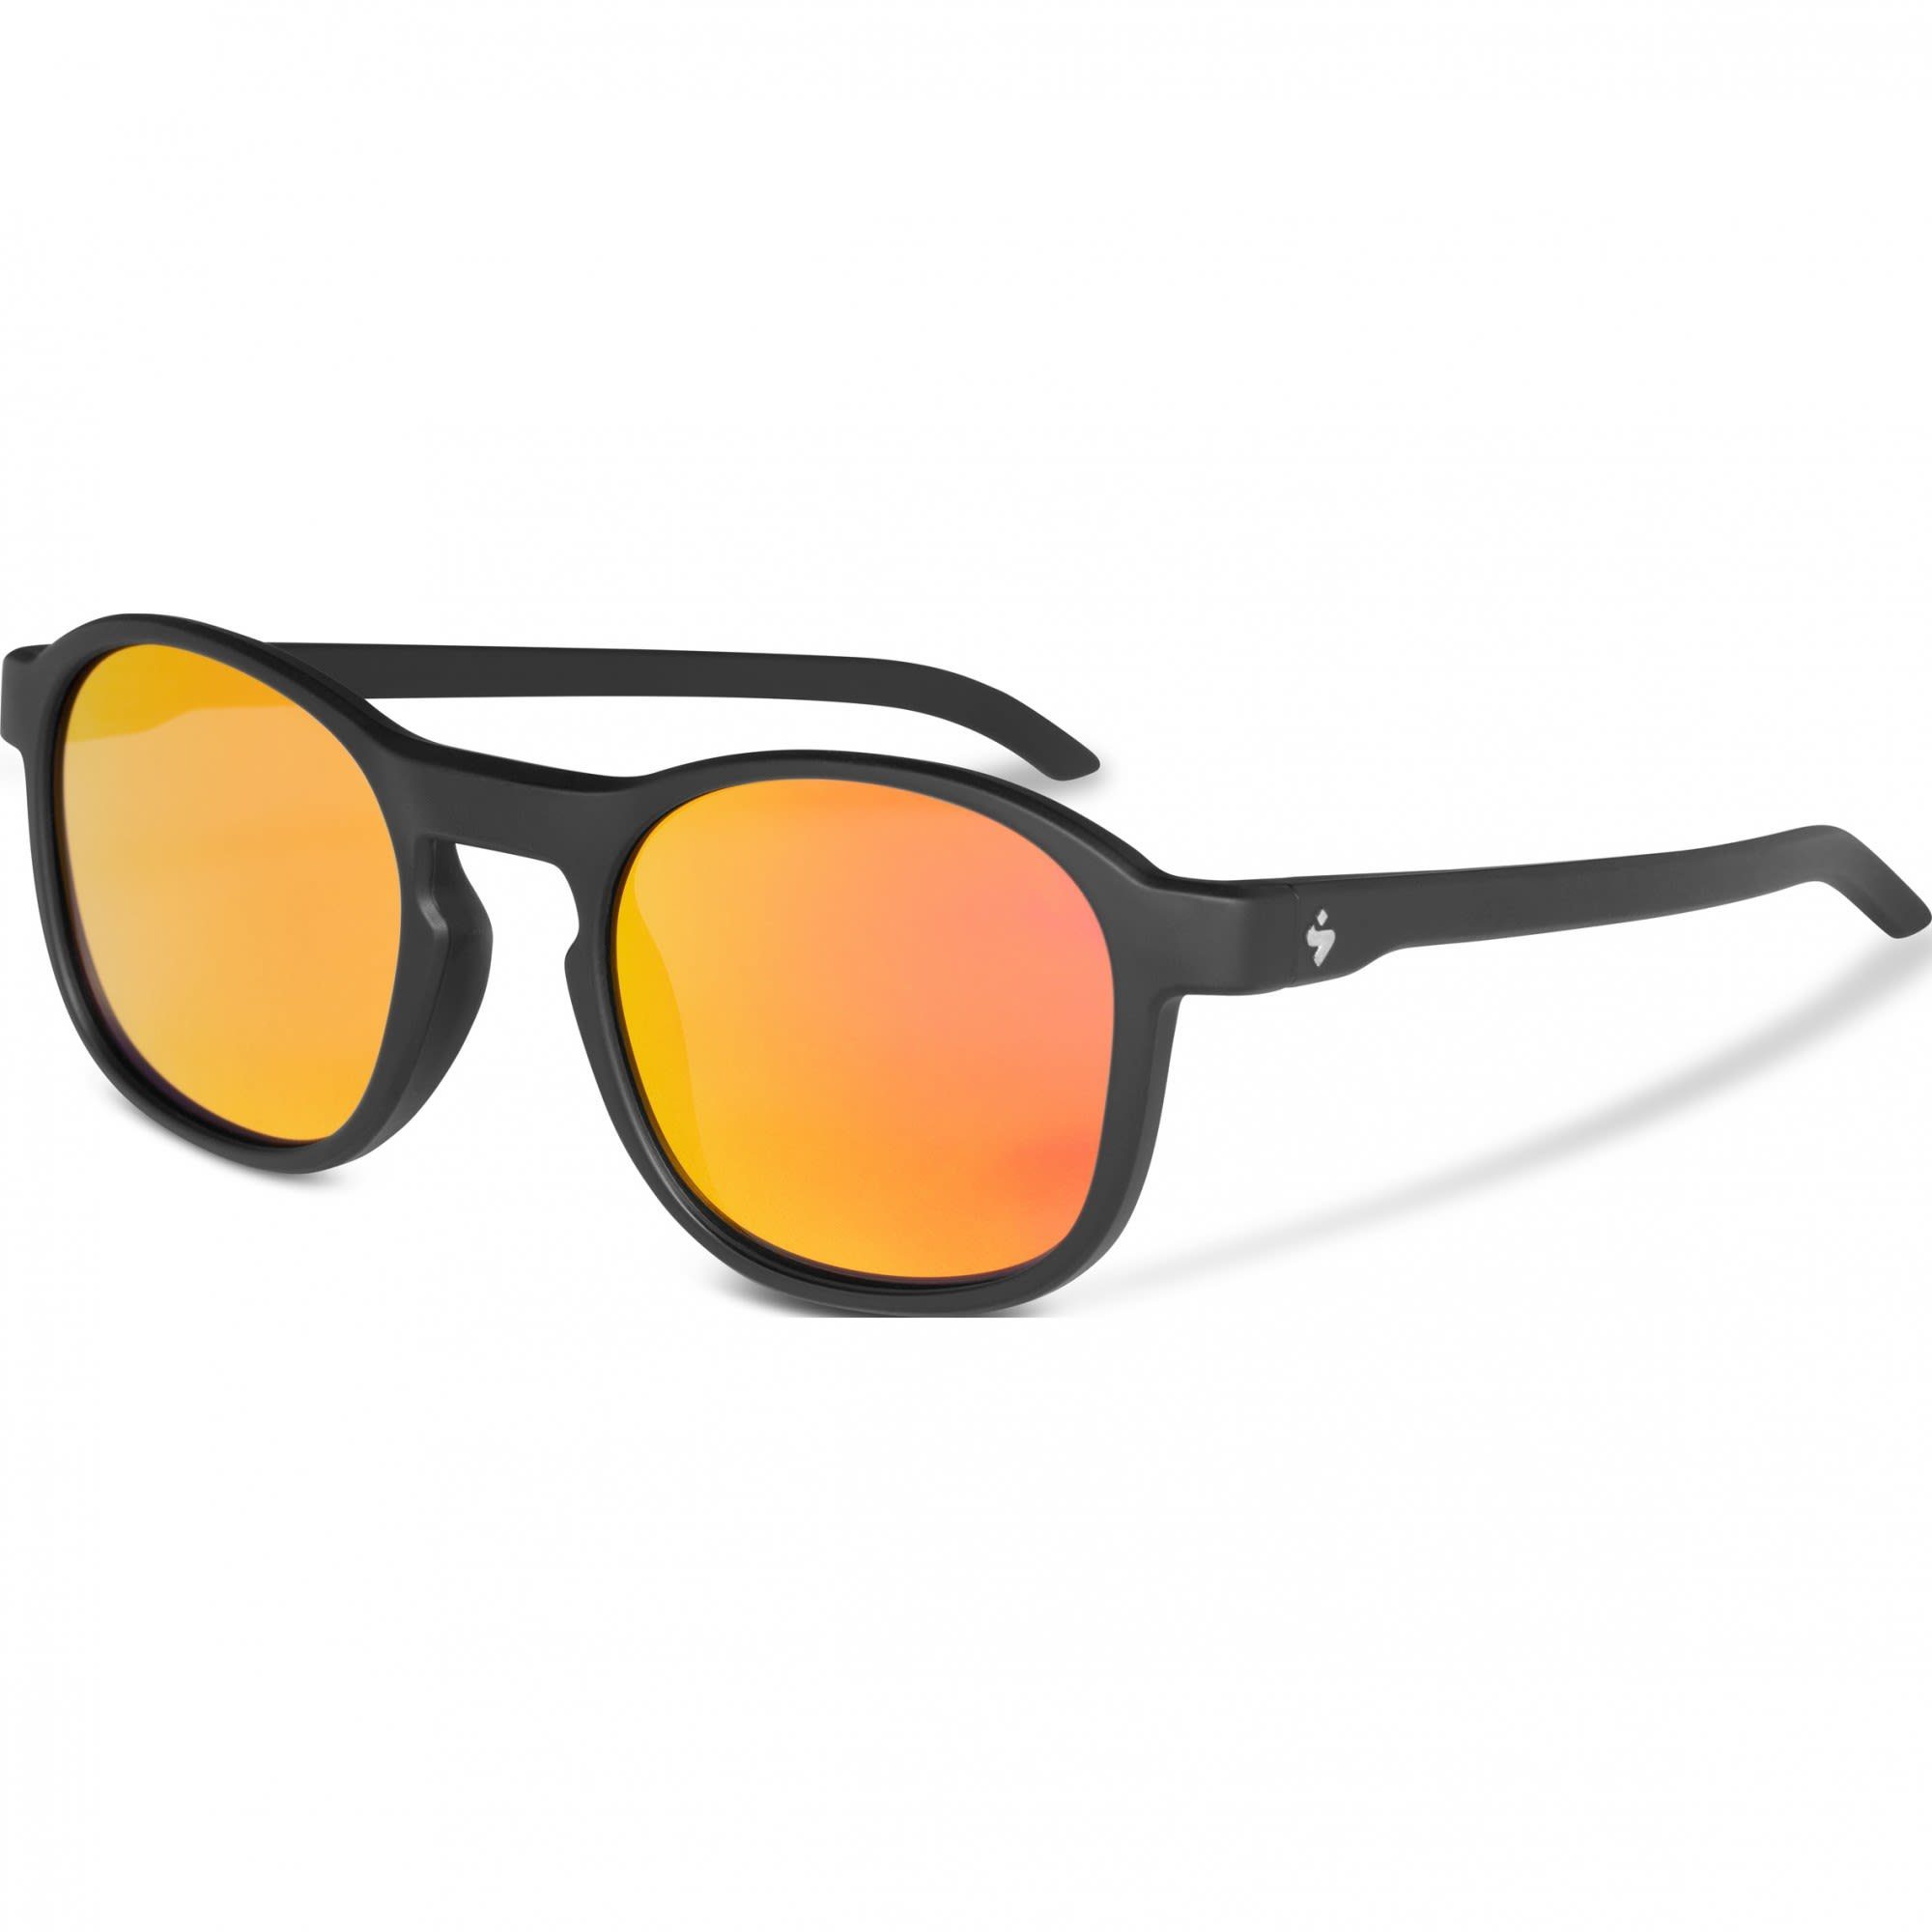 Accessoires Protection Protection Reflect Sweet Black RIG Rig - Sweet Sonnenbrille Heat Matte Topaz